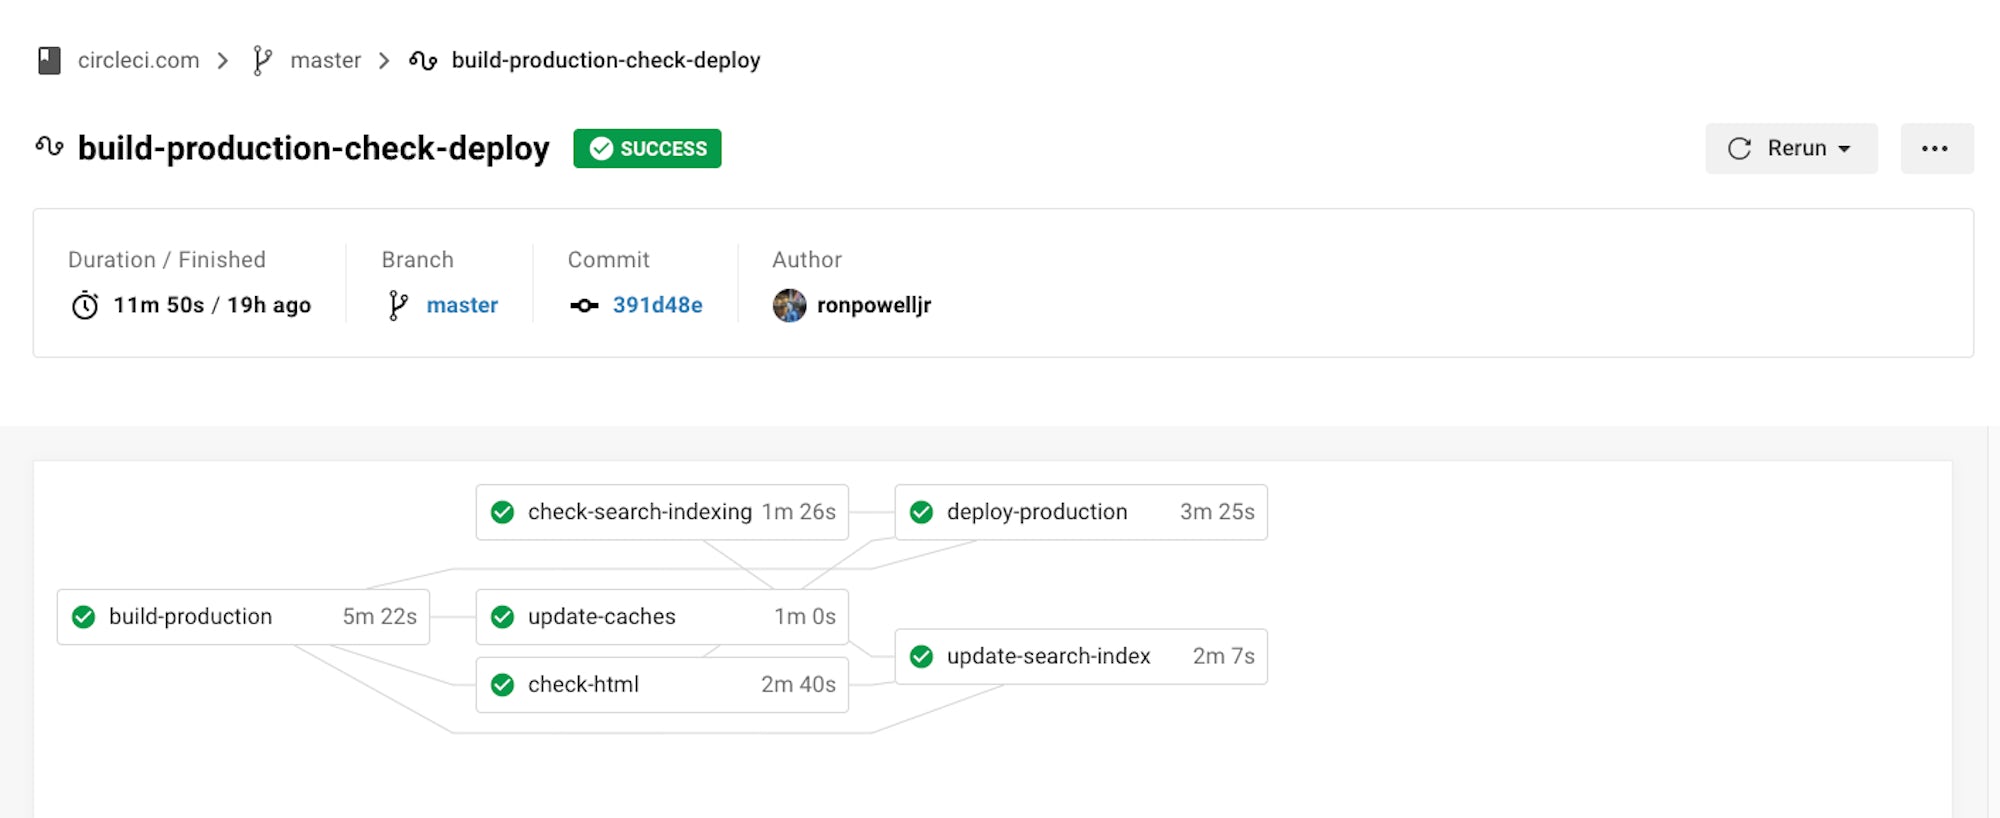 An image of jobs from CircleCI's UI